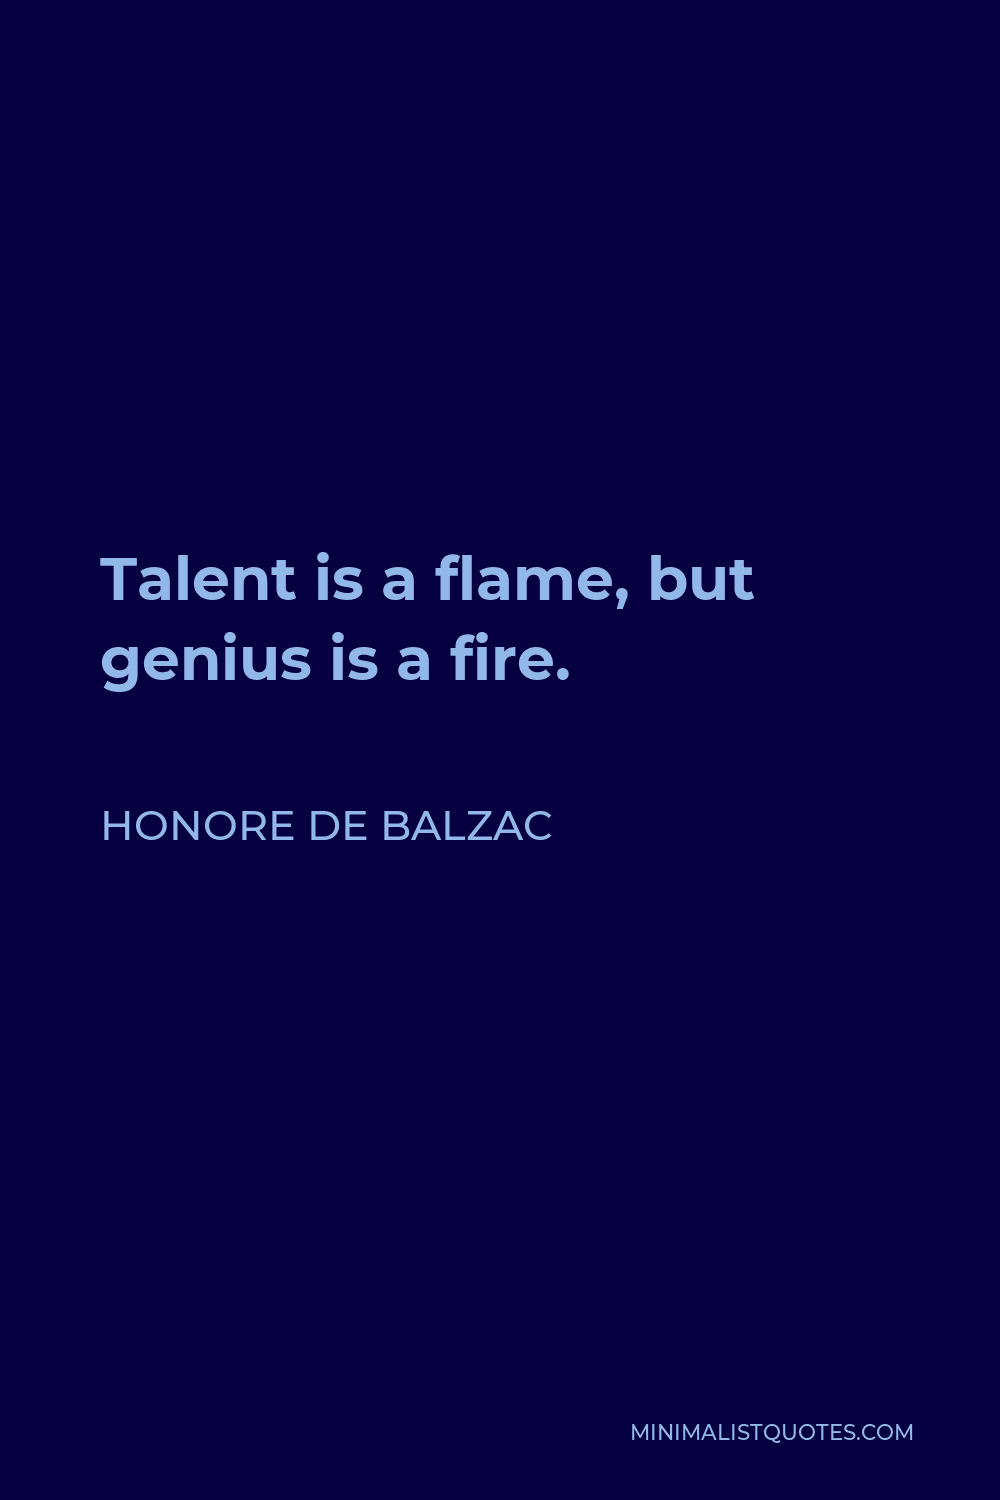 Honore de Balzac Quote - Talent is a flame, but genius is a fire.